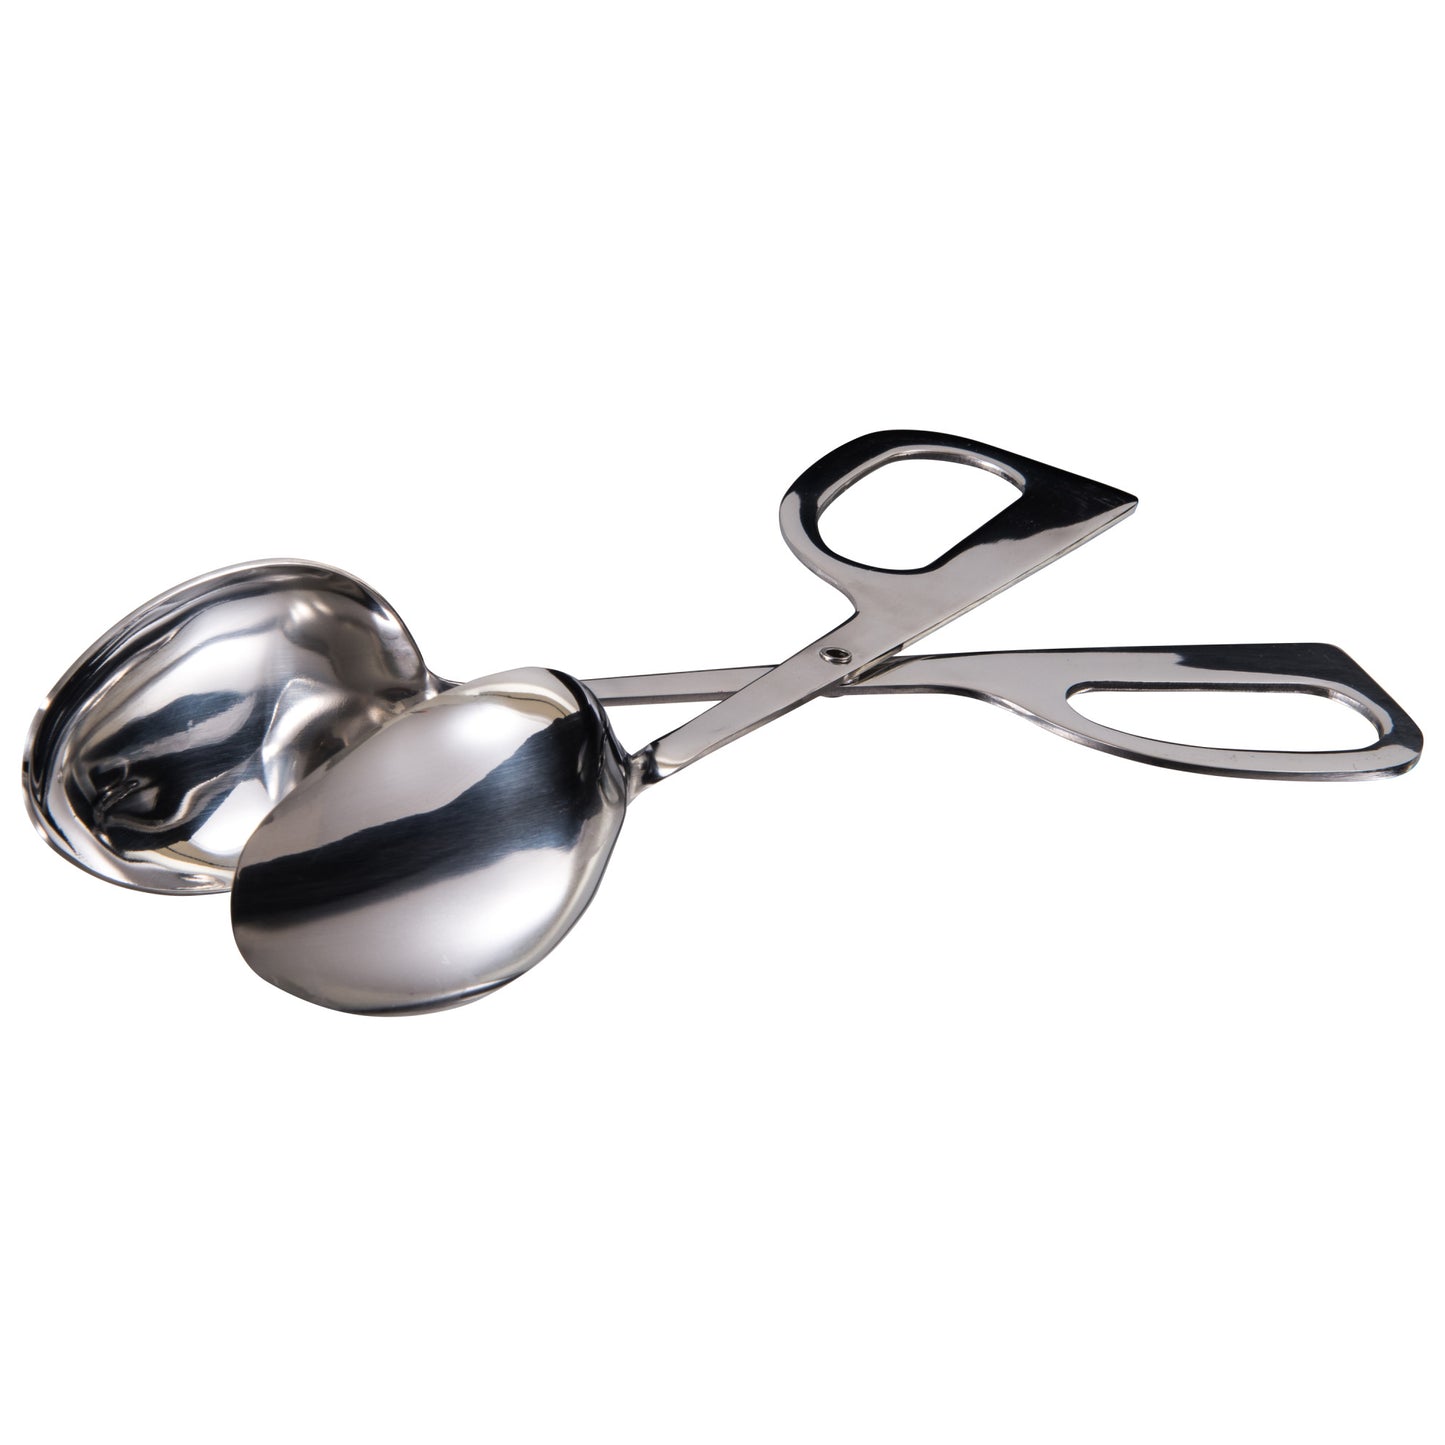 ST-2 - 10" Stainless Steel Salad Tongs, Double Spoon, Mirror Finish